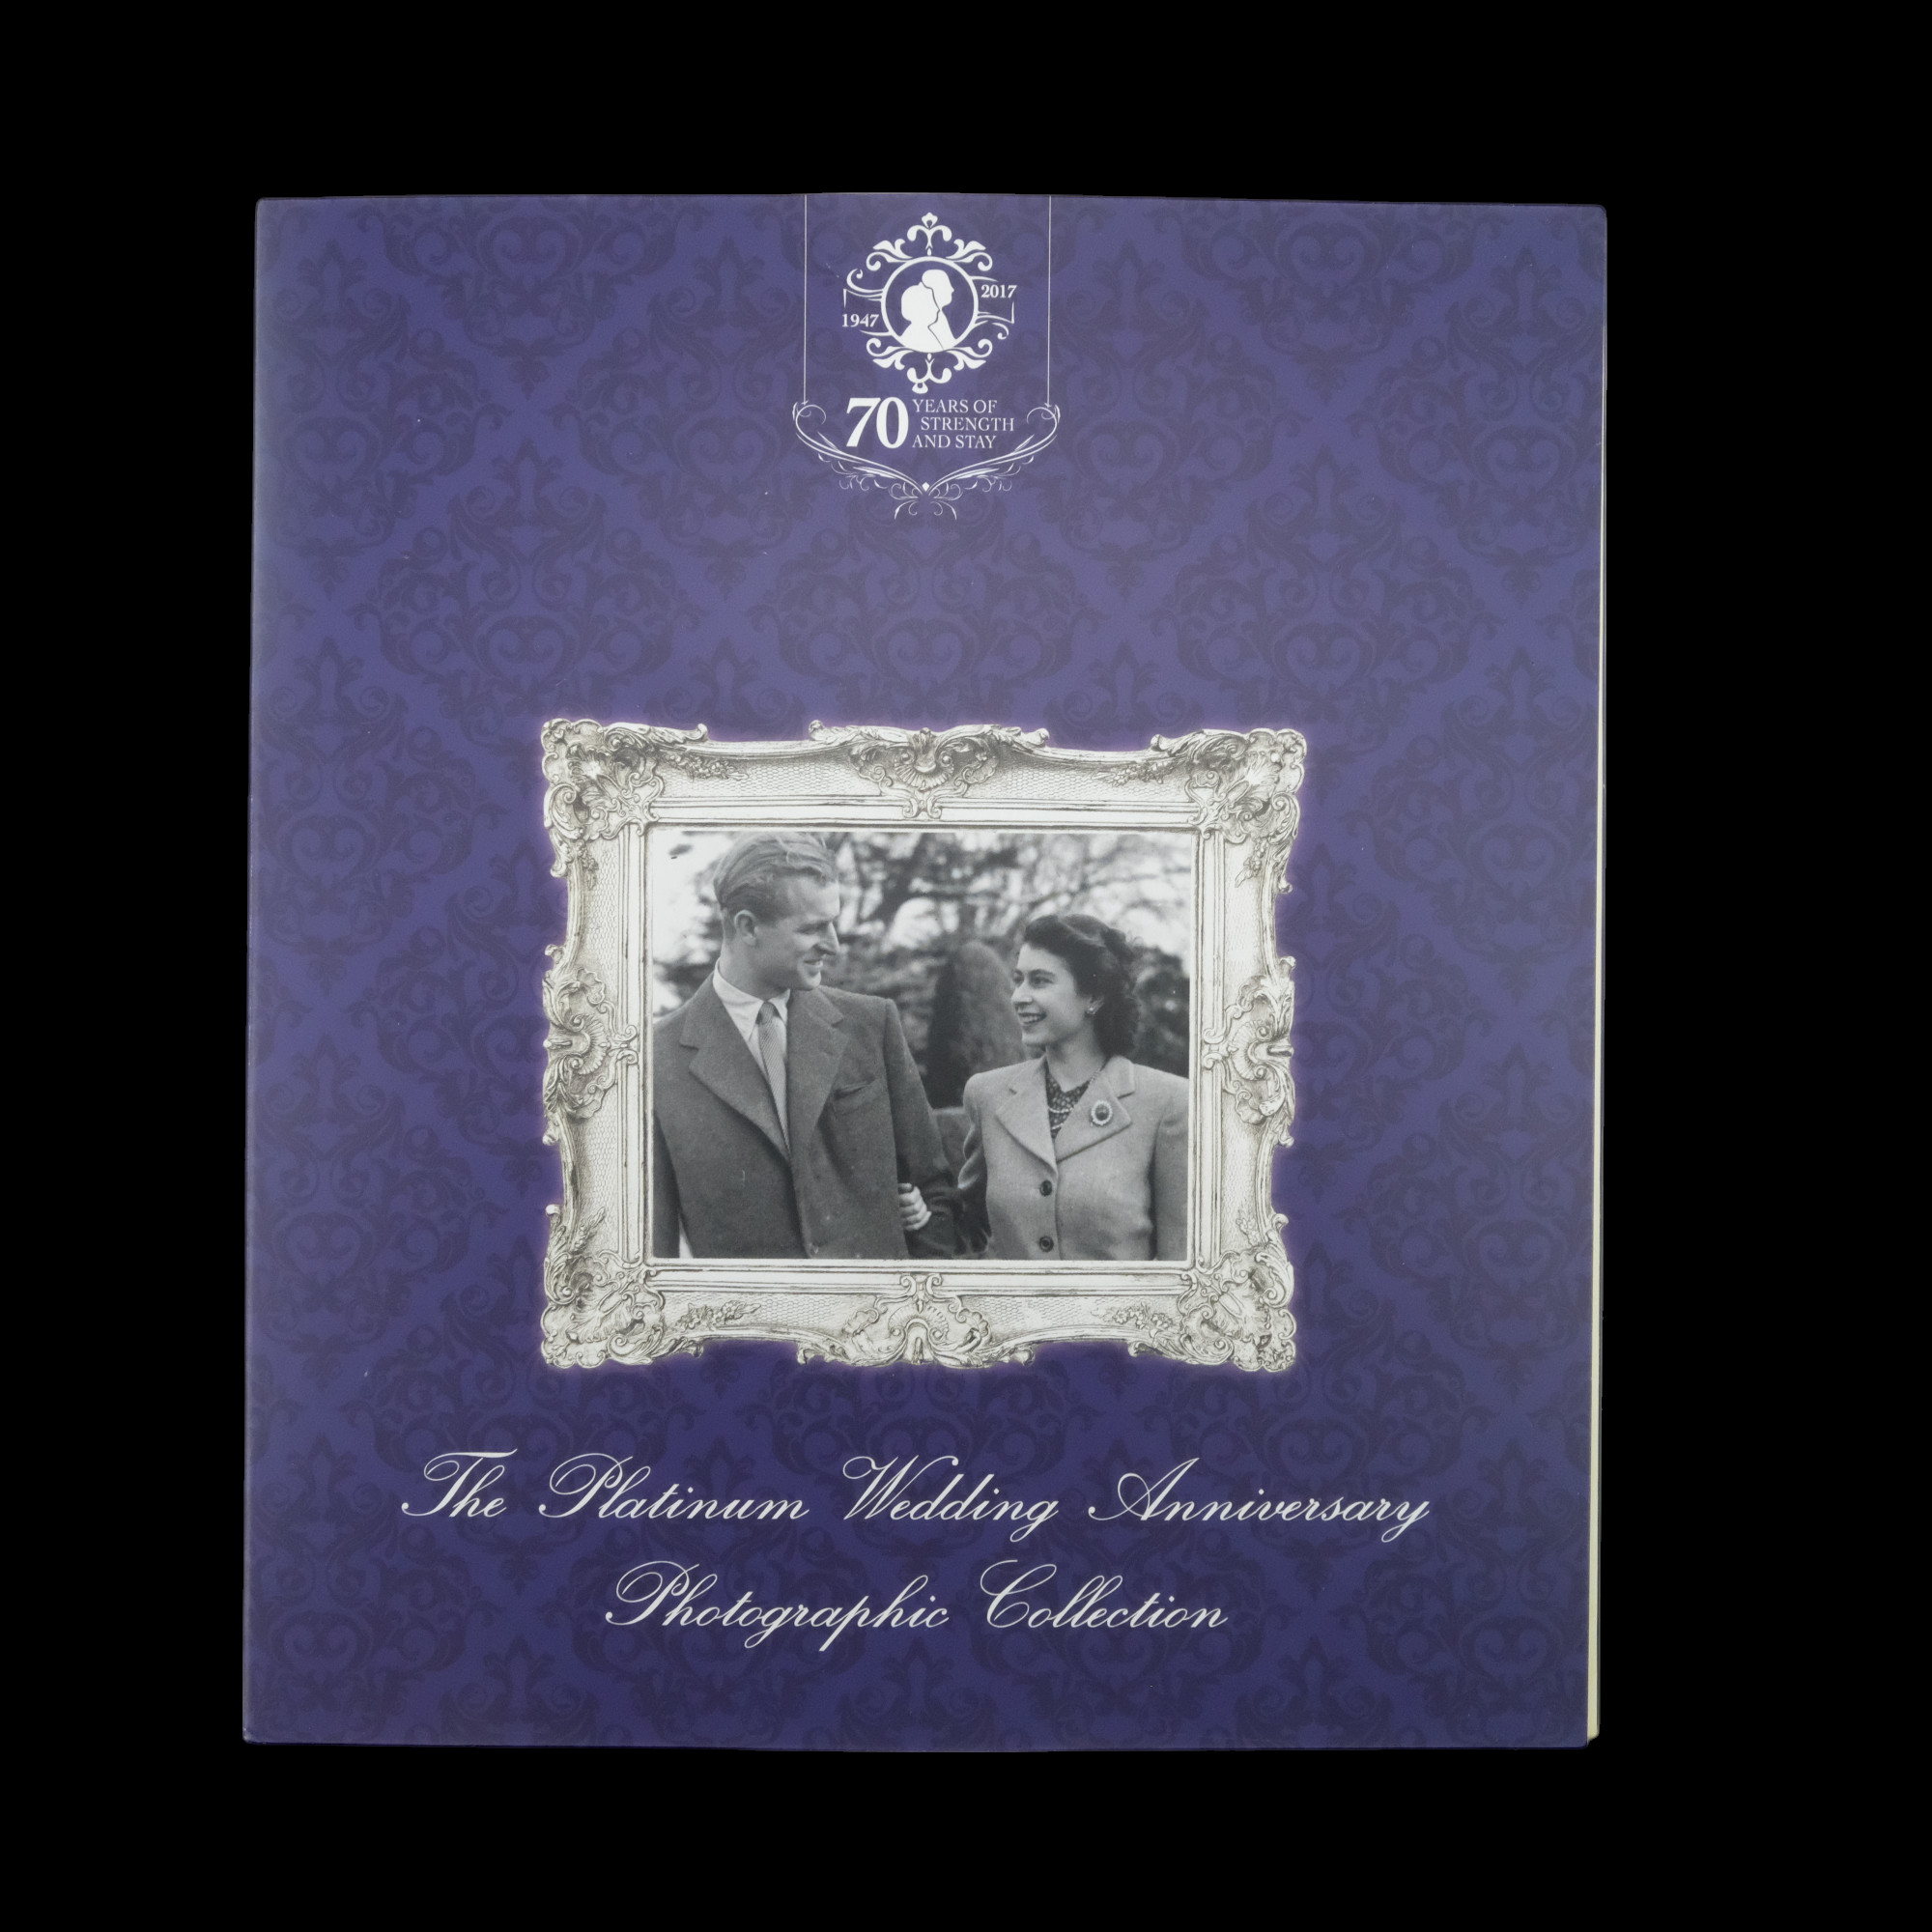 The Platinum Wedding Anniversary Photographic Collection royal commemorative coin set comprising The - Image 5 of 6